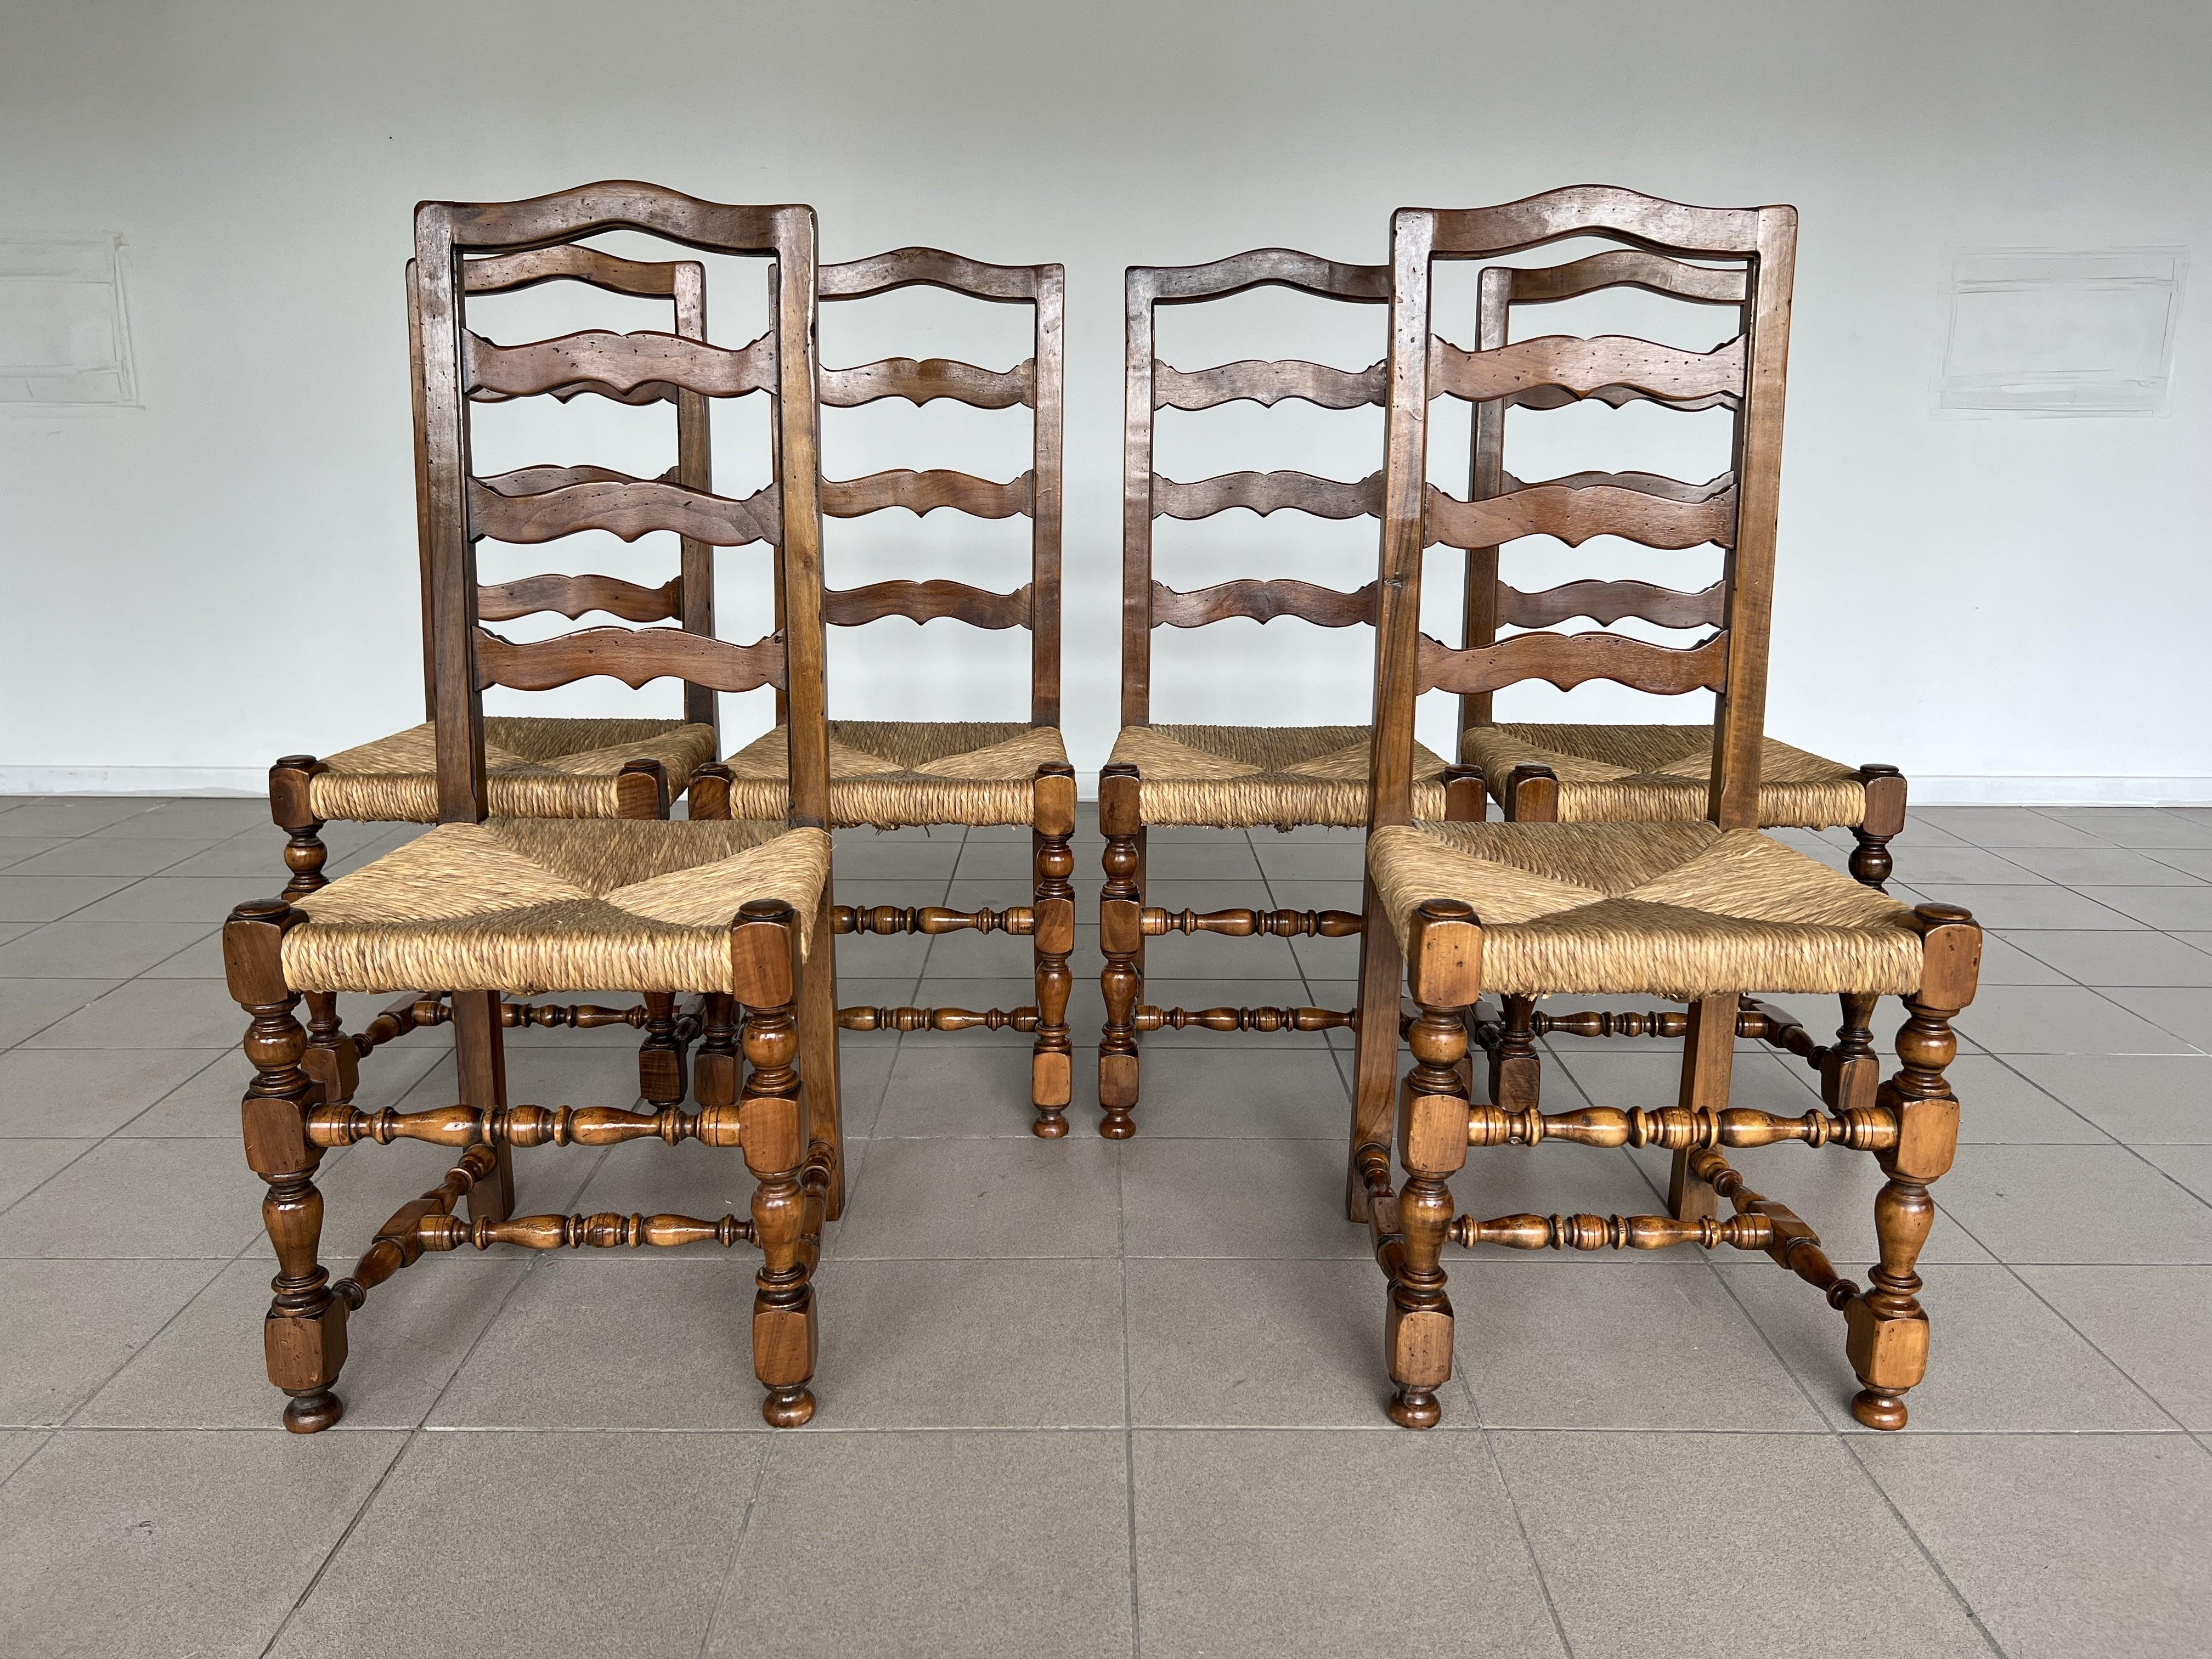 20th Century Attractive French Ladder Back Dining Chairs With Rush Woven Seats - Set of 6